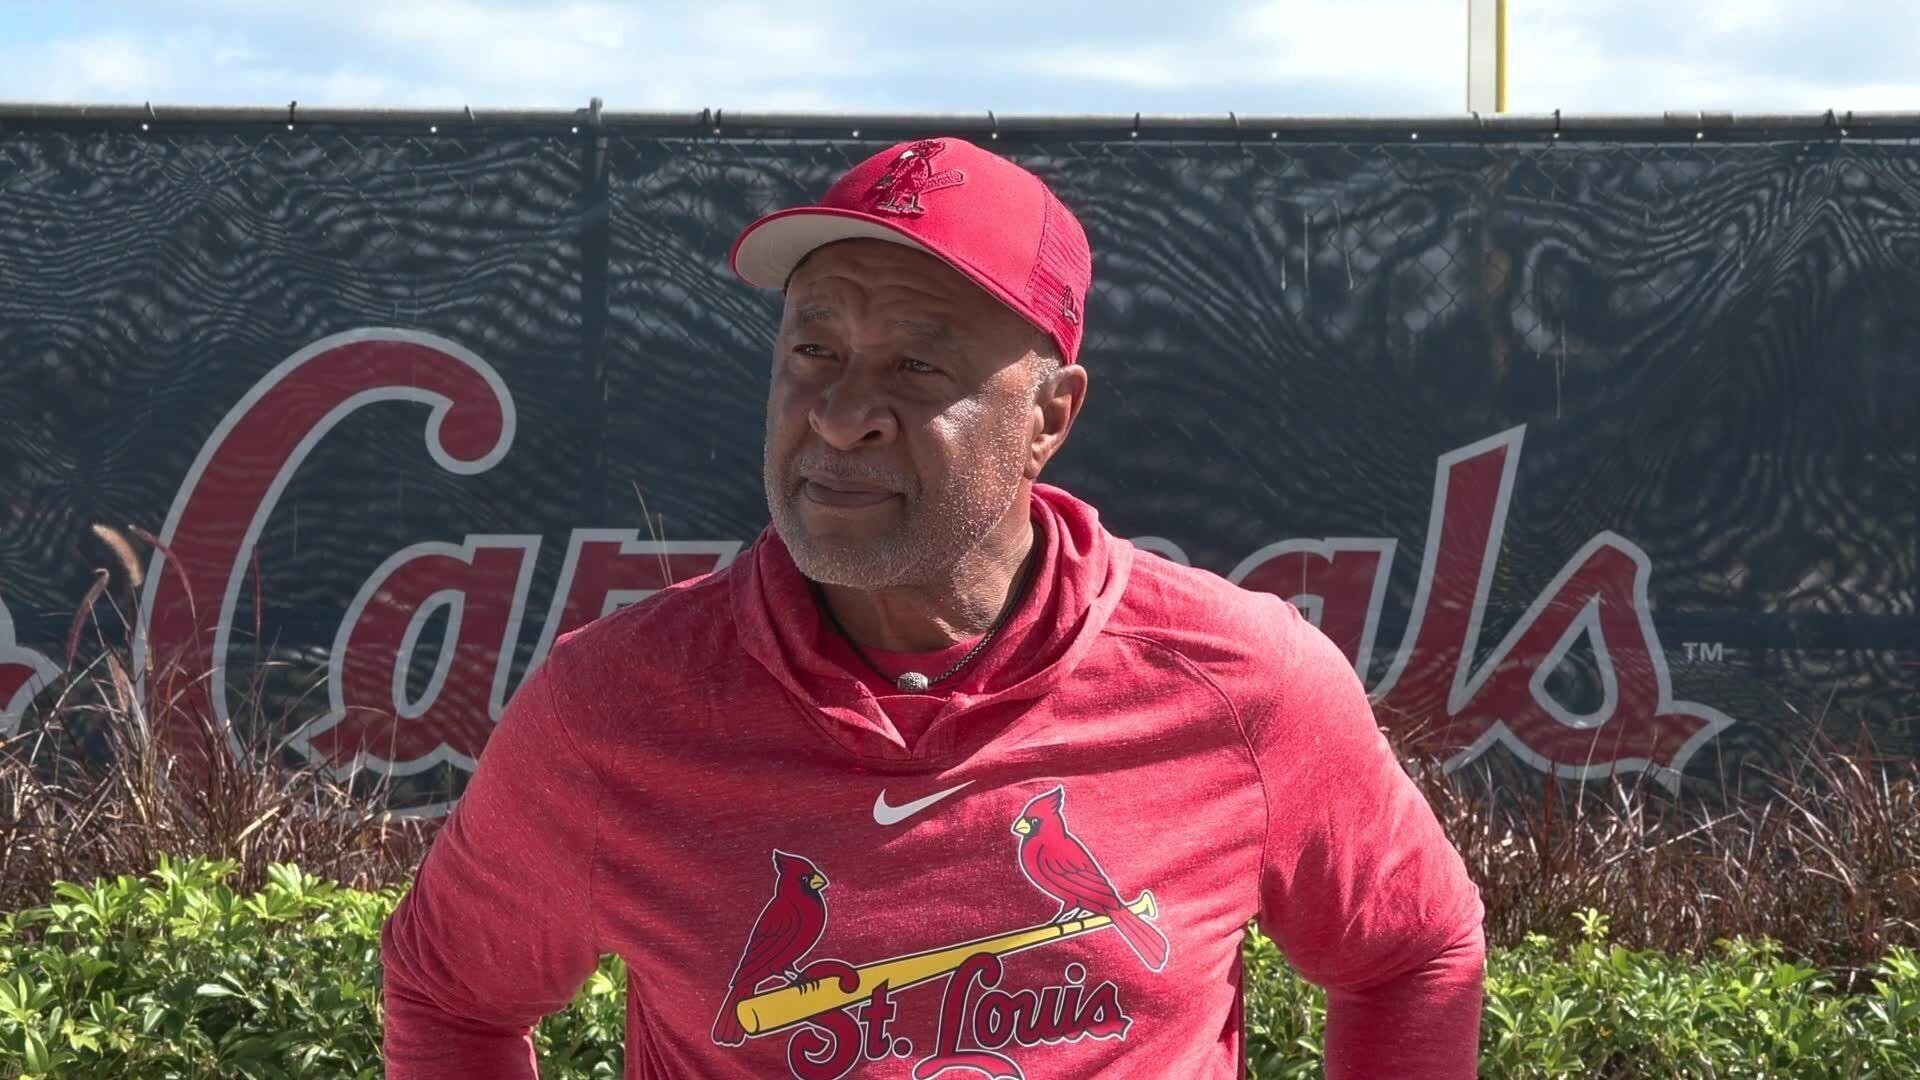 Jefferson City Welcomes Cardinal Ozzie Smith. Why Was He There?